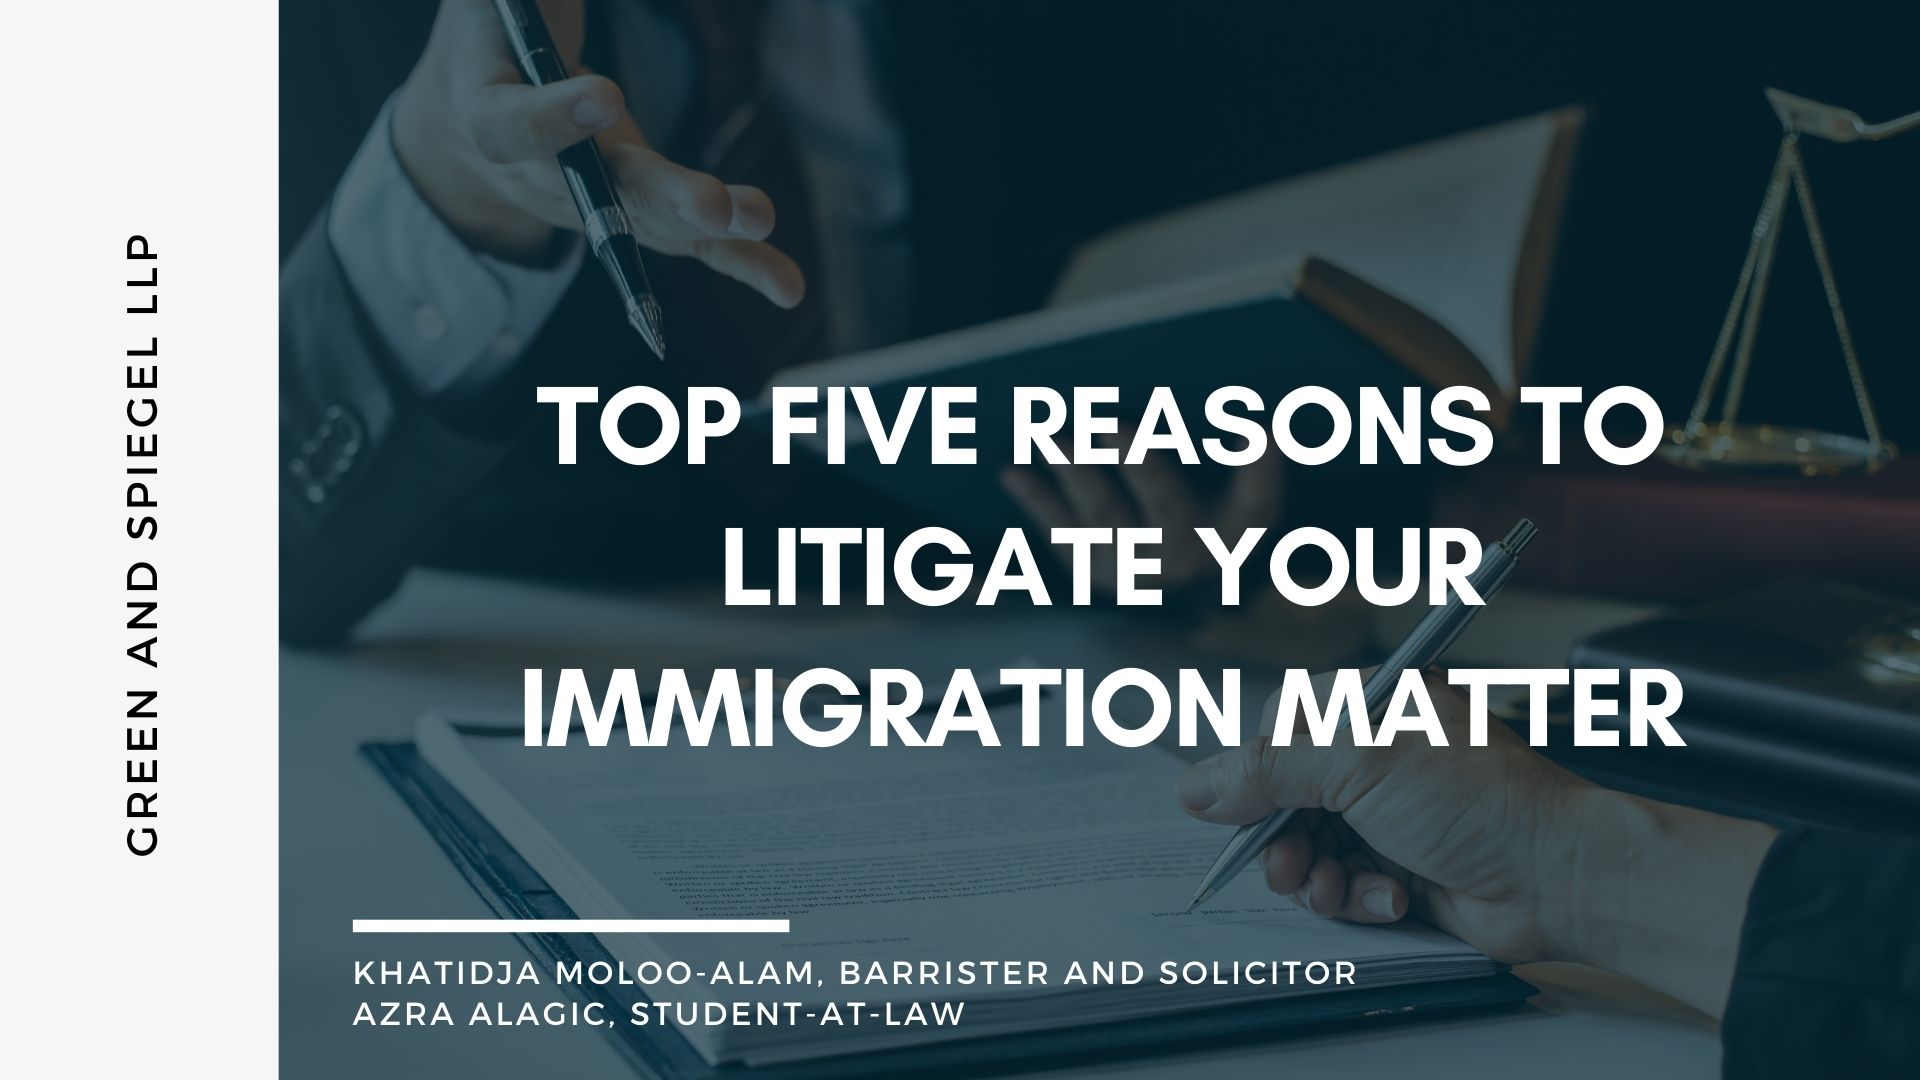 Top Five Reasons to Litigate Your Immigration Matter